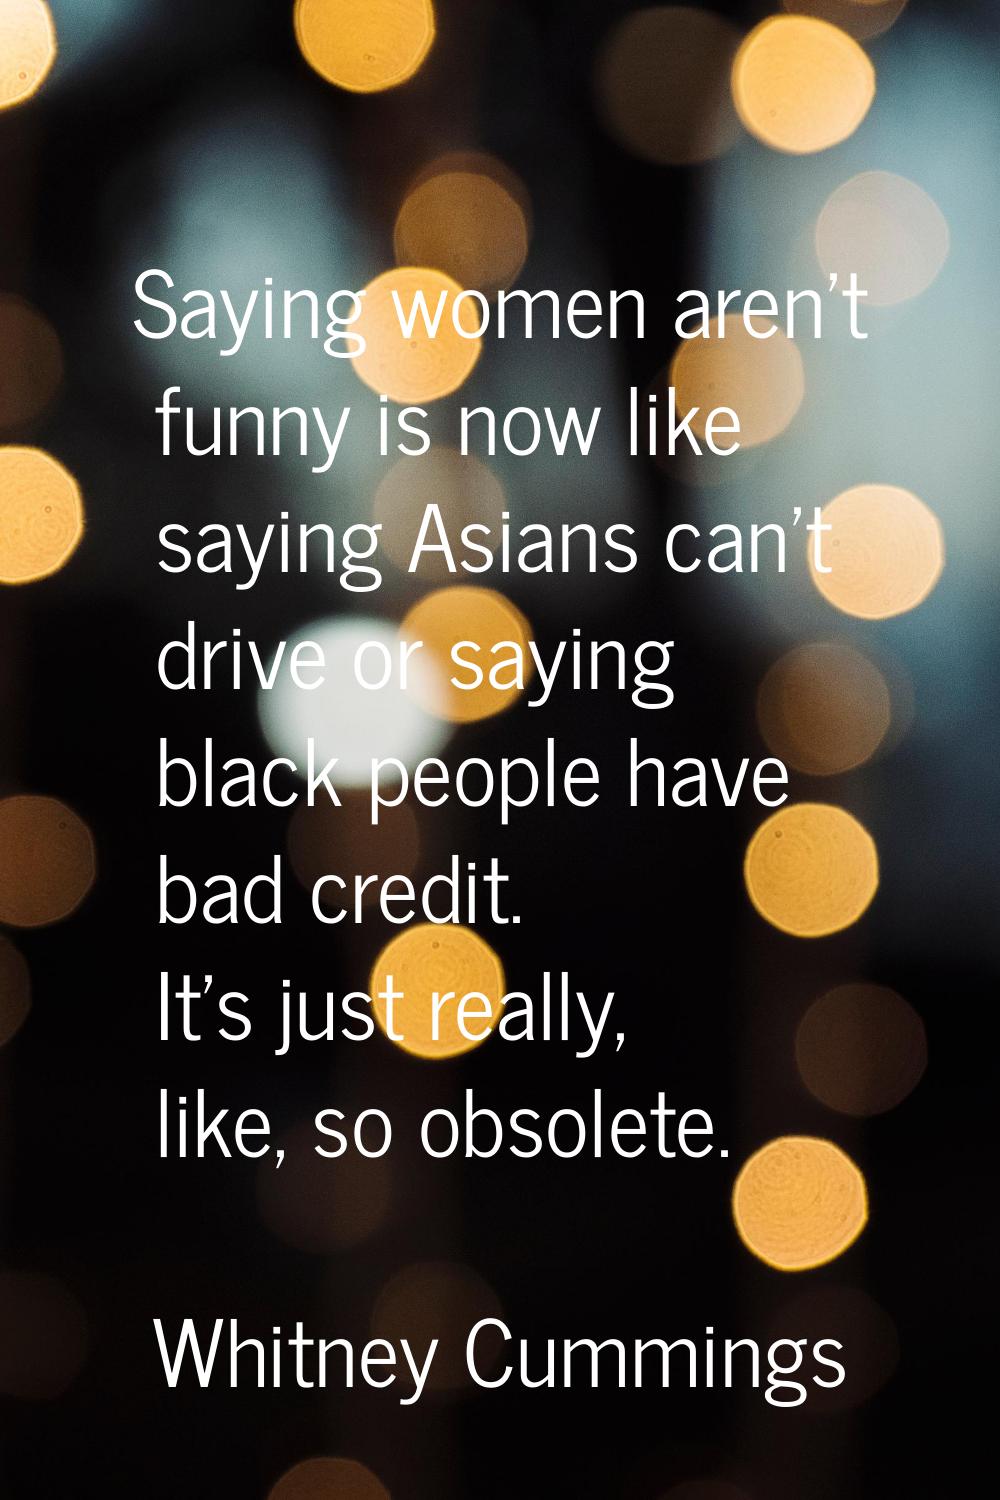 Saying women aren't funny is now like saying Asians can't drive or saying black people have bad cre